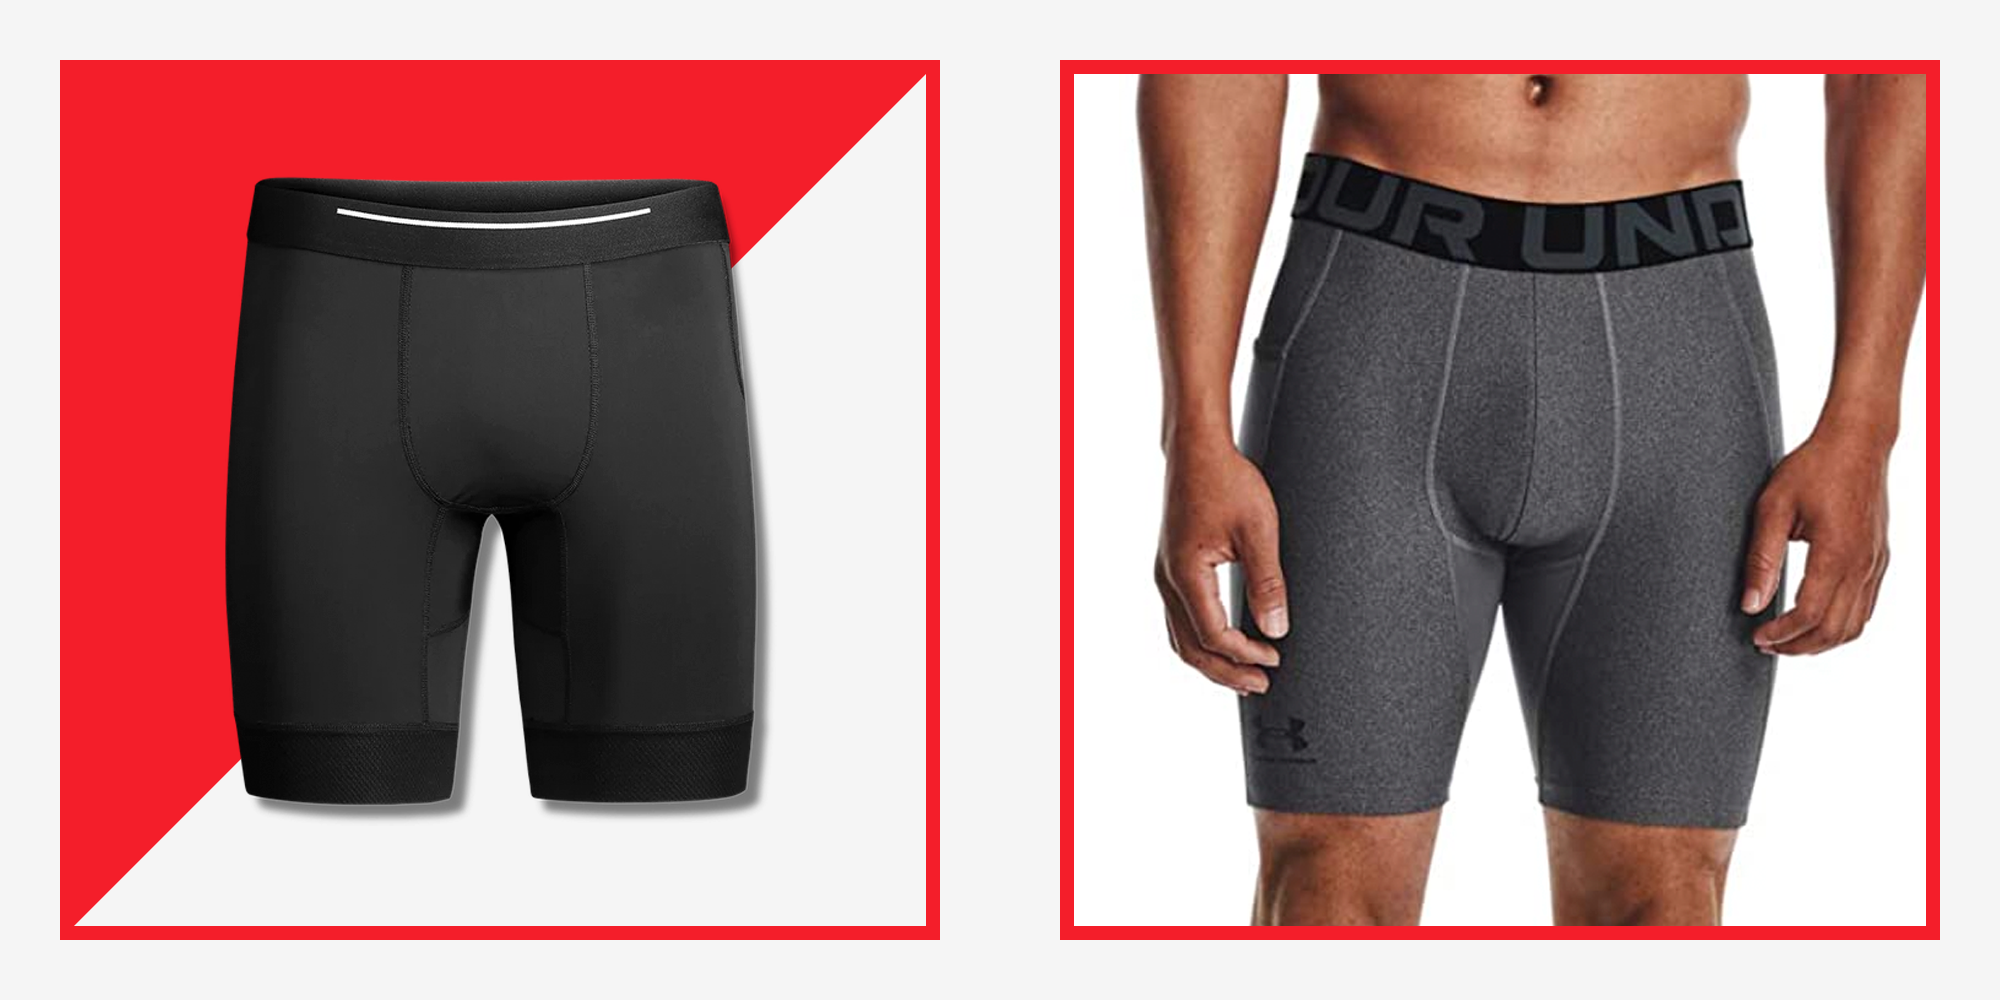 Could This Be the World's Greatest Underwear for Men?